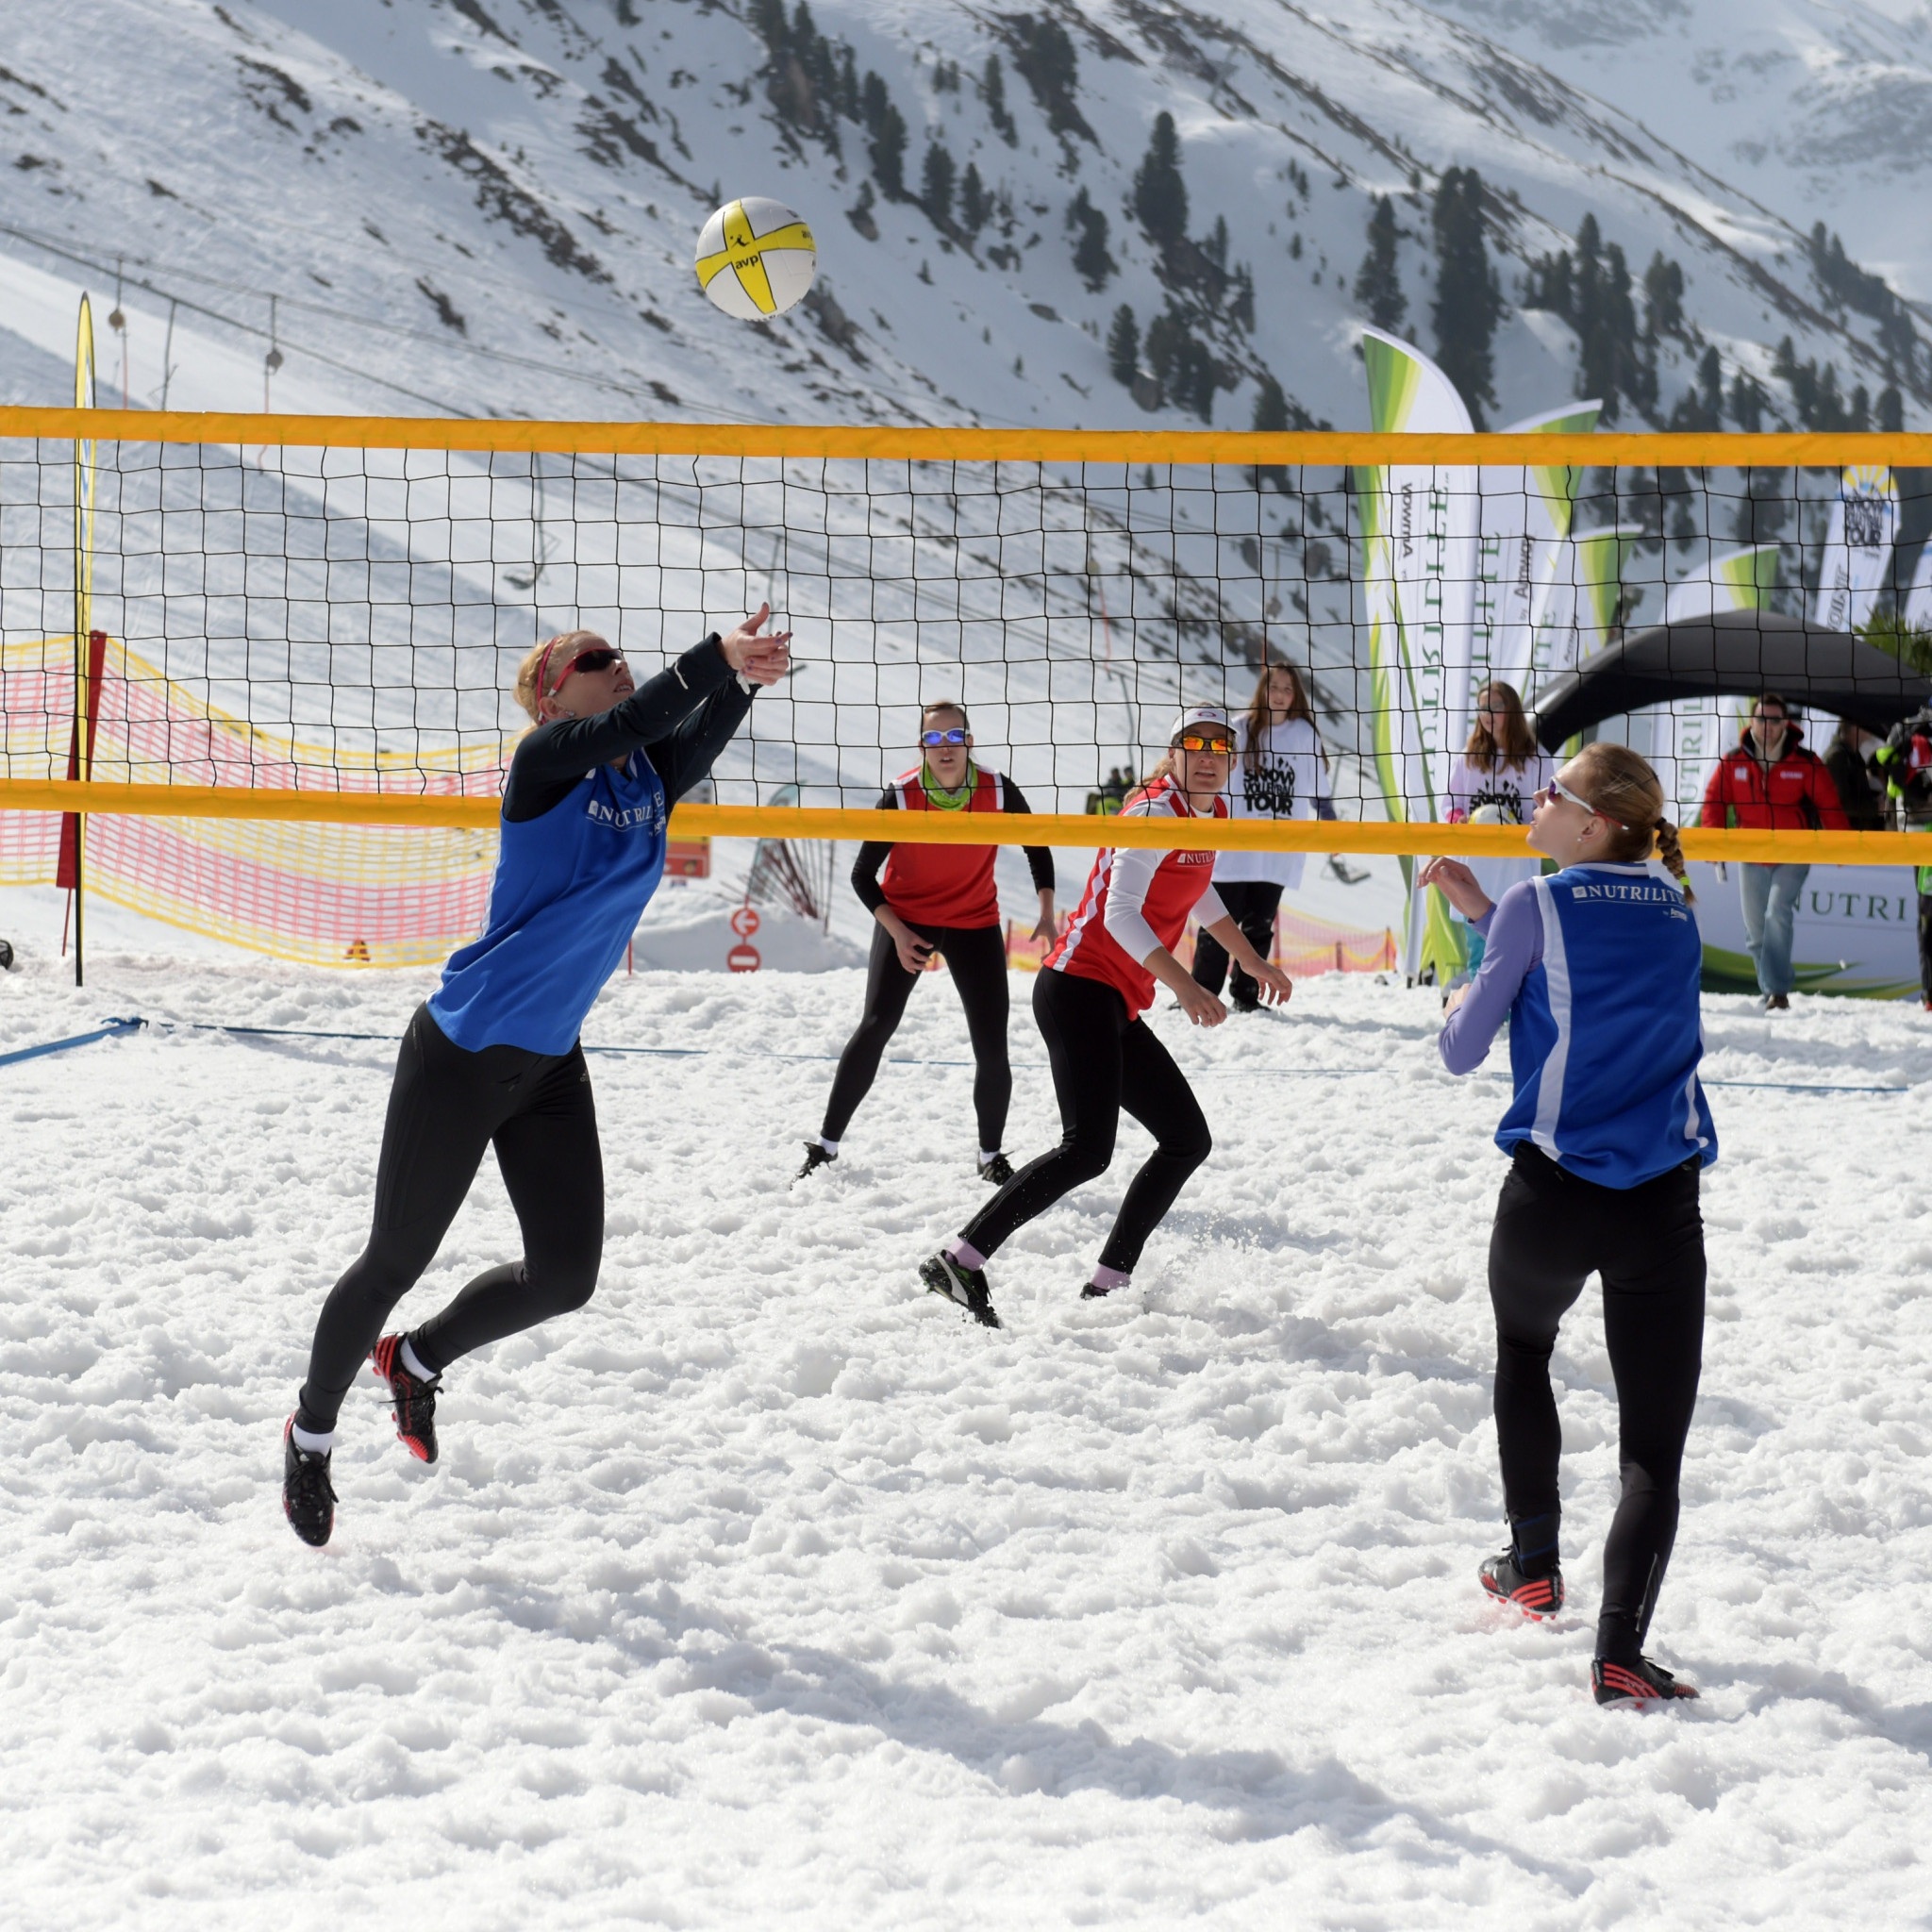 New 3x3 snow volleyball format established in bid to gain Winter Olympic inclusion